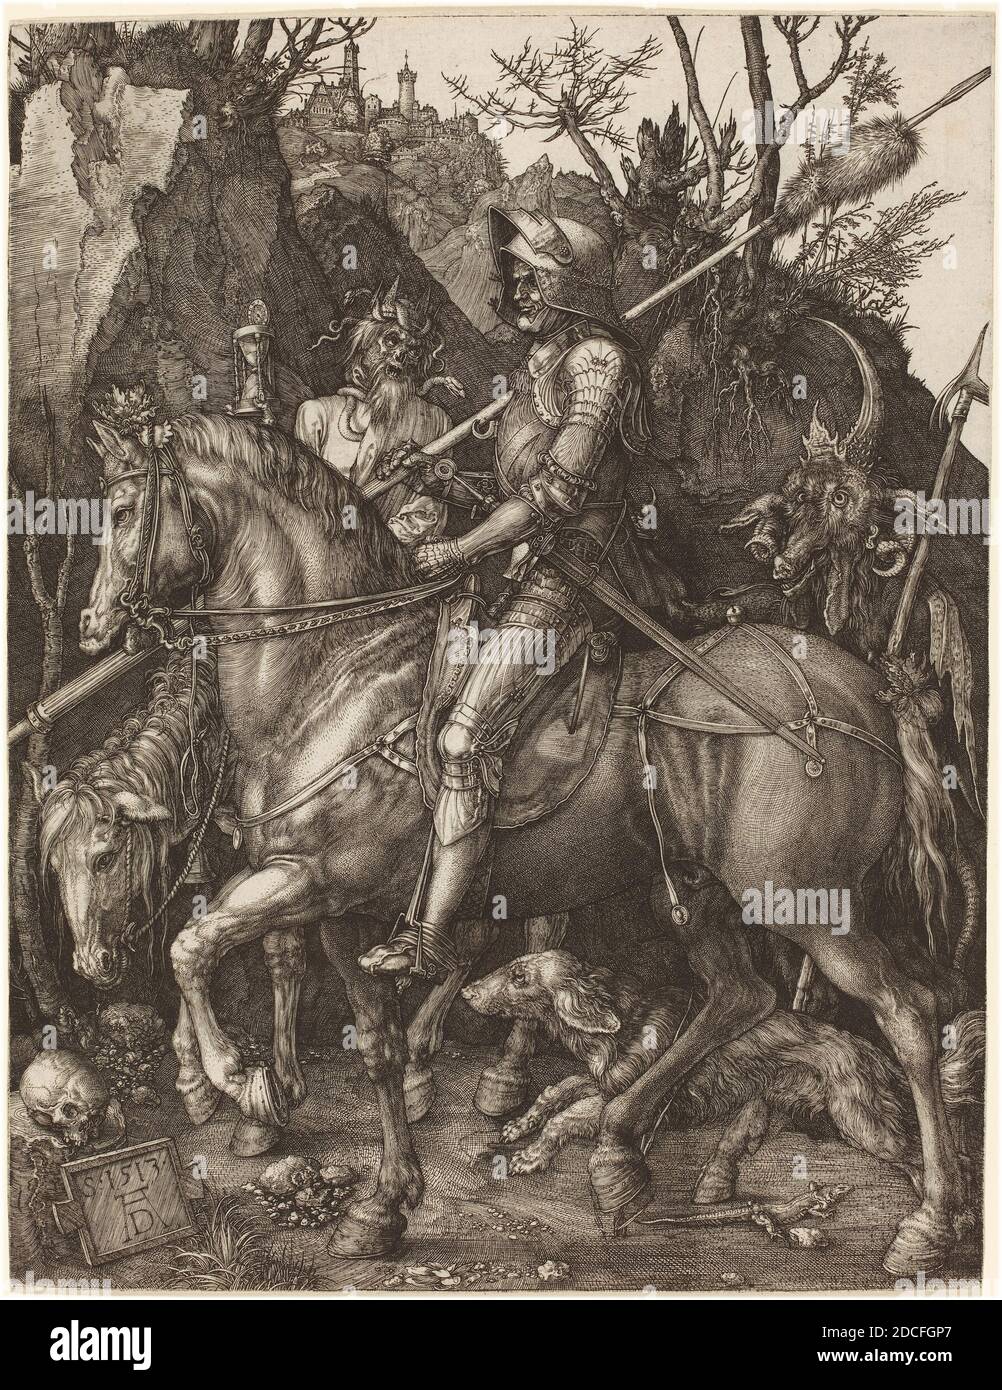 Albrecht Dürer, (artist), German, 1471 - 1528, Knight, Death and Devil, 1513, engraving on laid paper, sheet (trimmed to plate mark): 24.8 x 19 cm (9 3/4 x 7 1/2 in Stock Photo